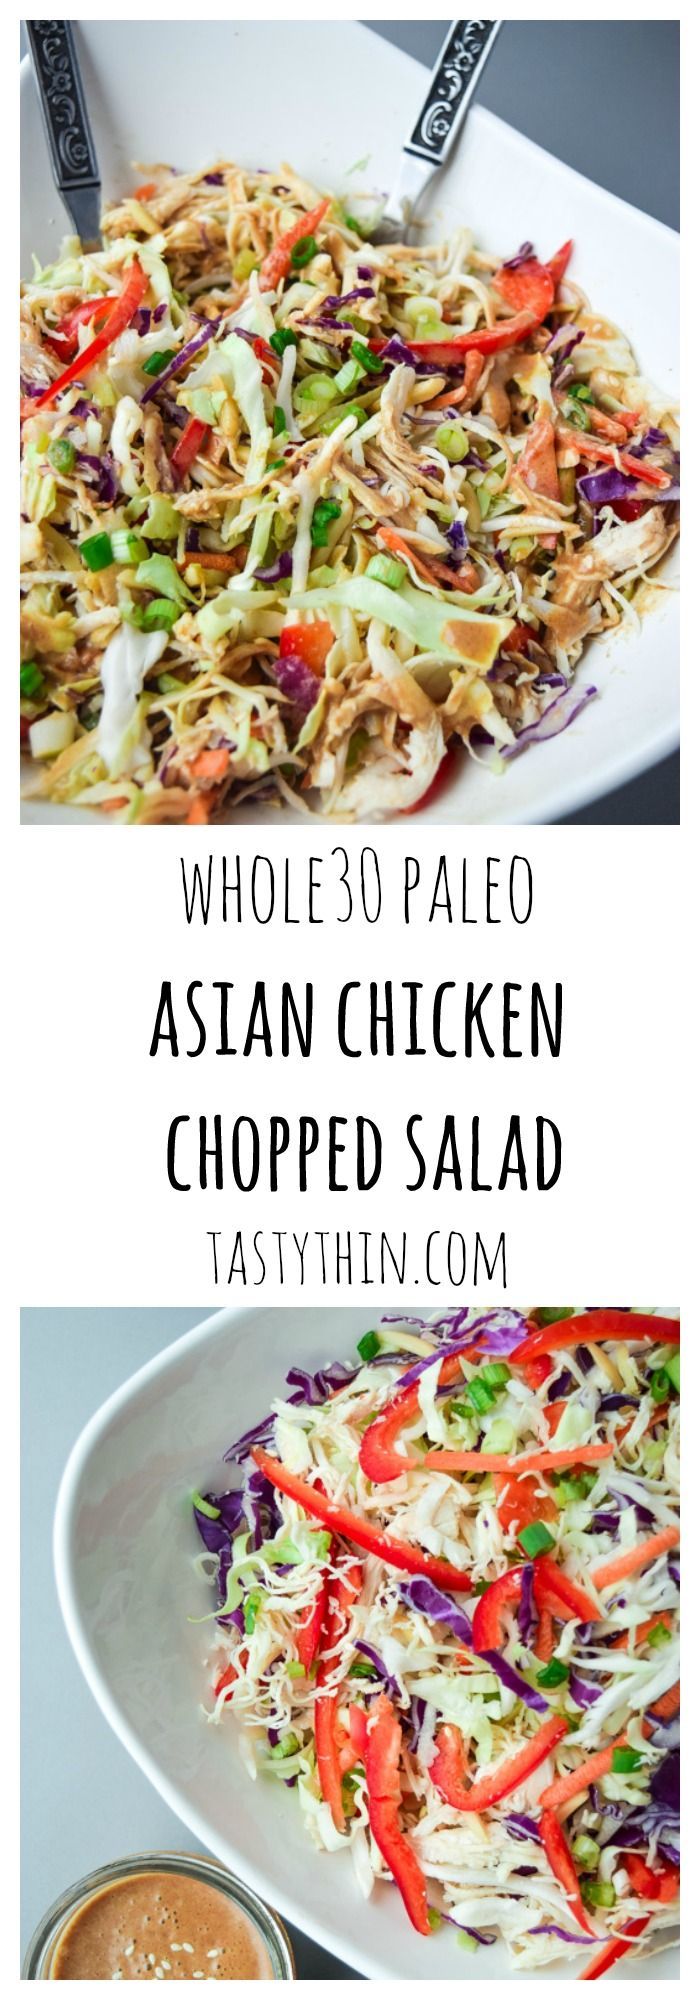 Asian Chicken Chopped Salad (Whole30 Paleo) – a deliciously nutritious salad with a sweet and tangy Asian dressing, free of soy or